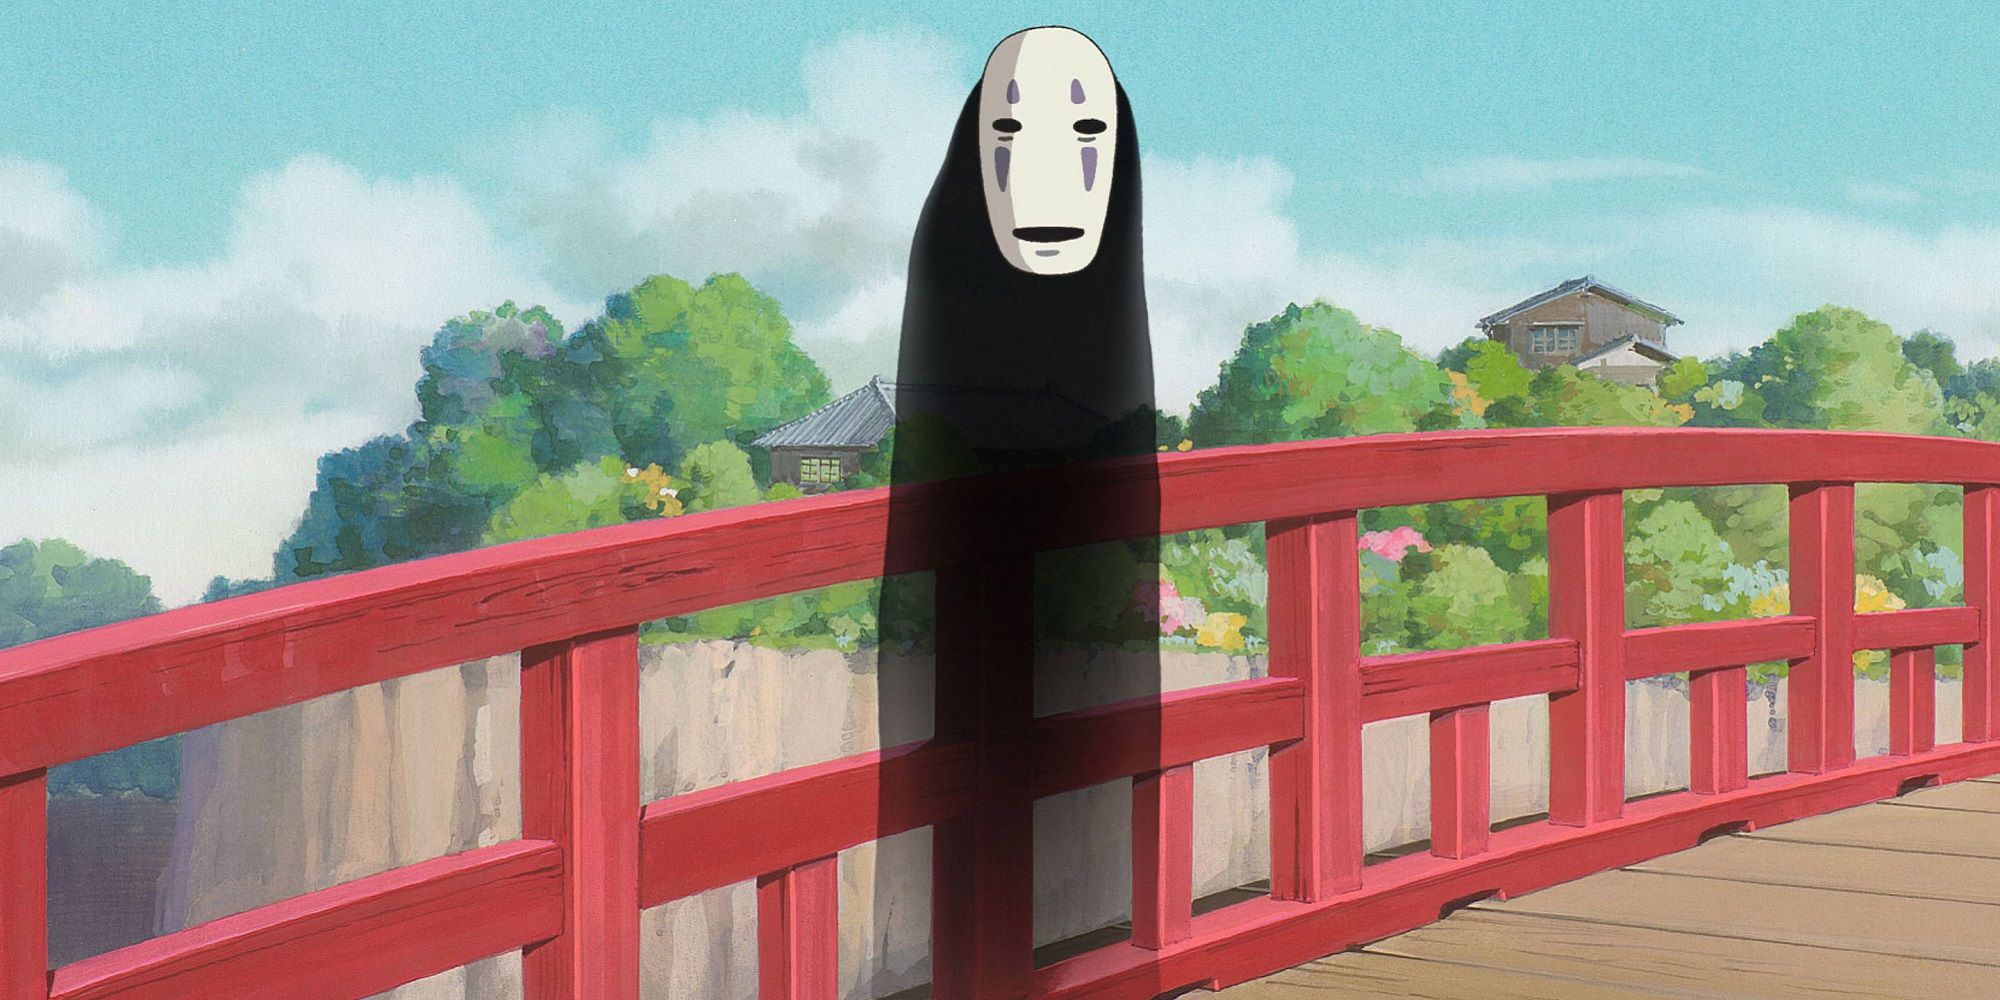 8 MyersBriggs® Personality Types Of Spirited Away Characters